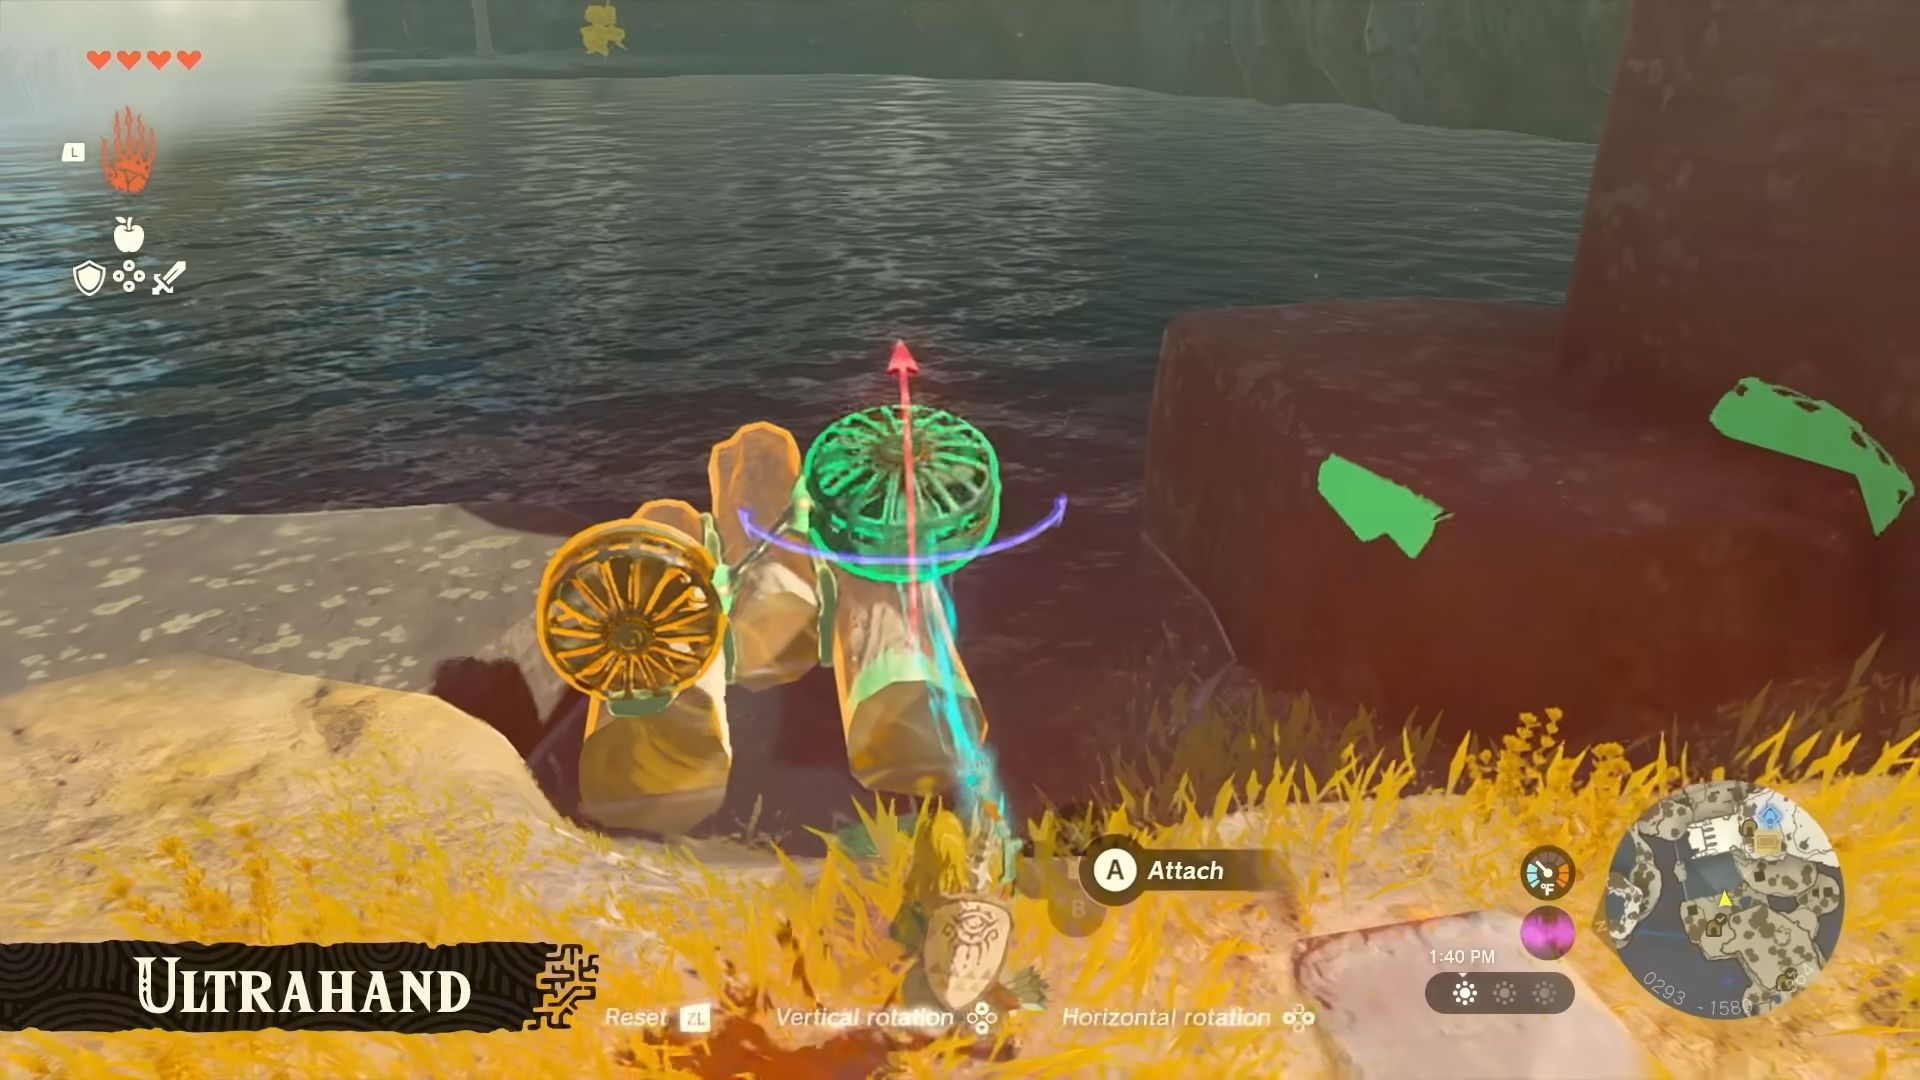 Link using Ultrahand in Tears of the Kingdom to build a raft.